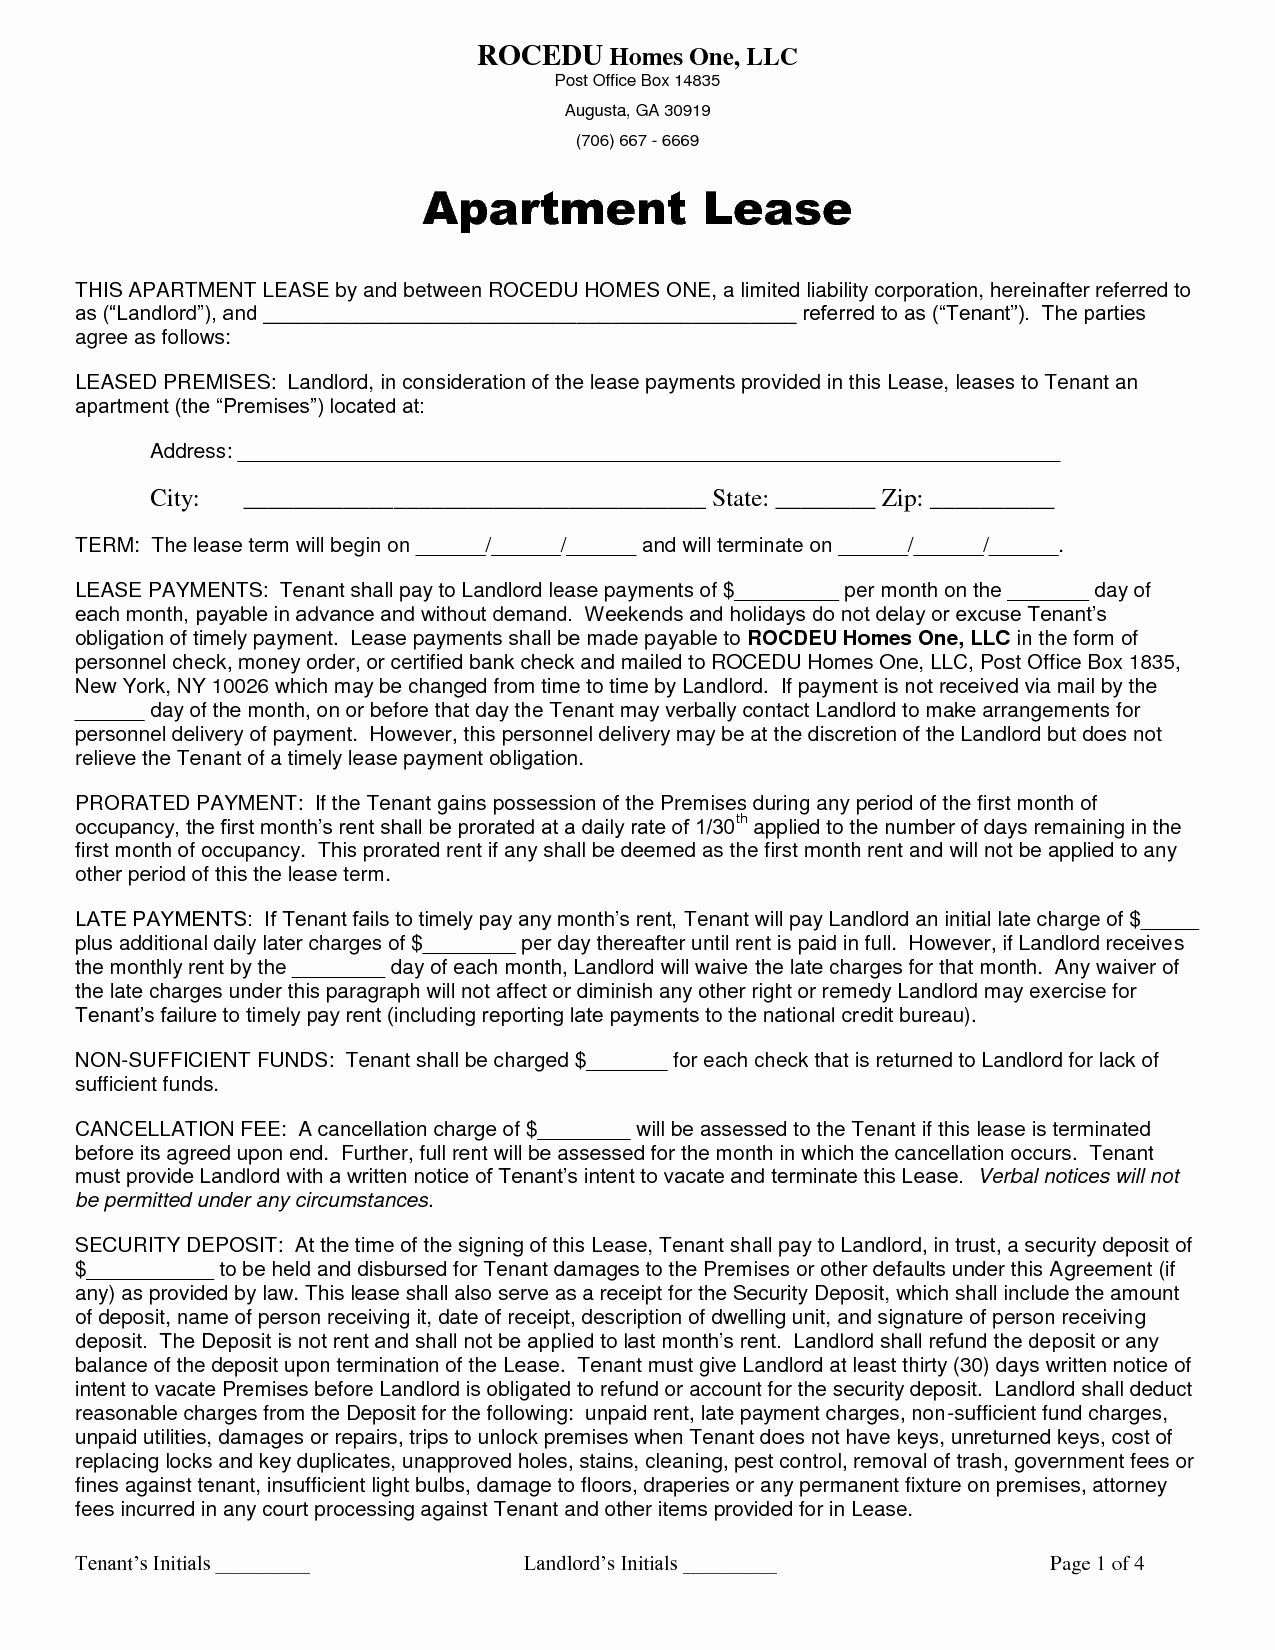 Sample Apartment Lease Doc by Gabyion Apartment Lease